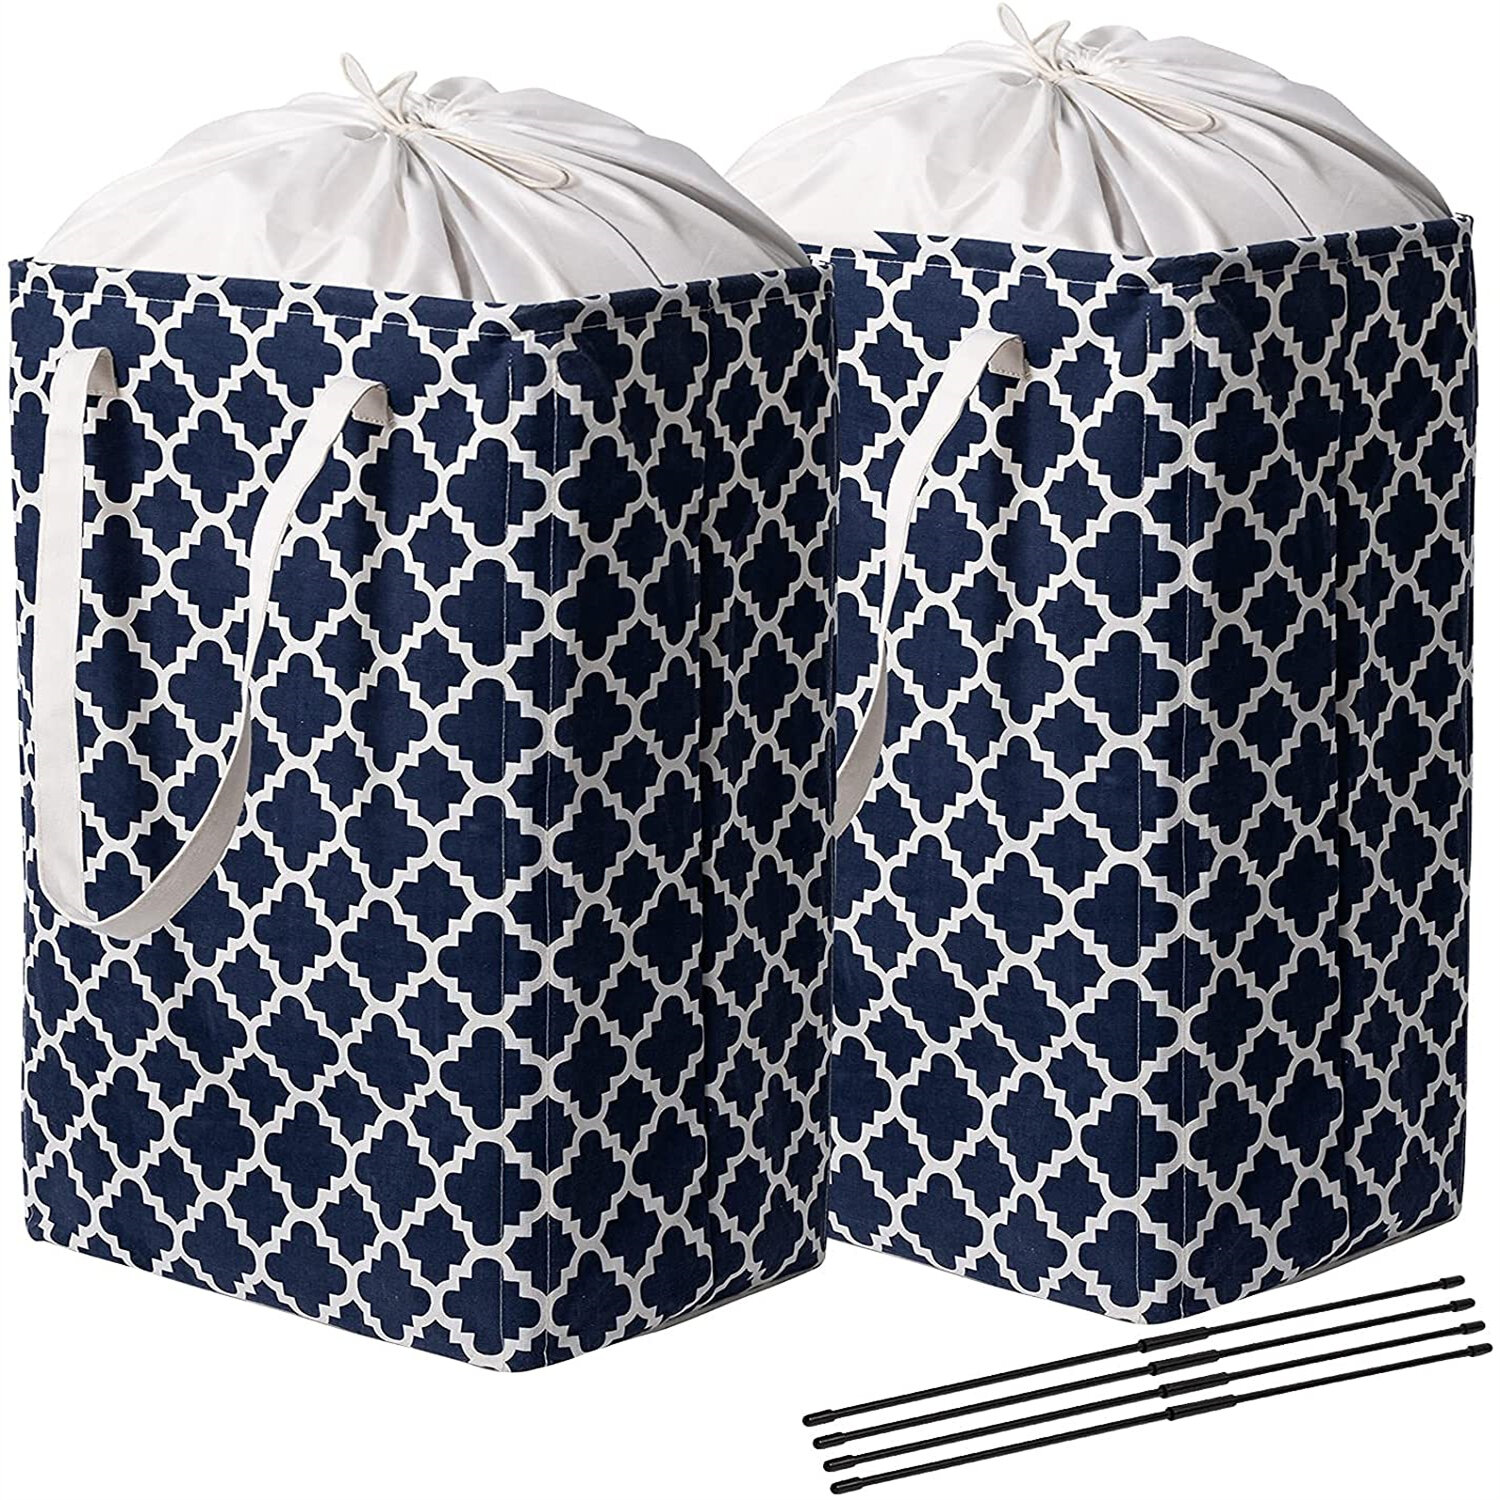 Freestanding Laundry Hamper With Support Rods ELONG HOME Laundry Basket 2 Pack Black Anti-dust Dirty Clothes Hamper with Easy Carry Handles 